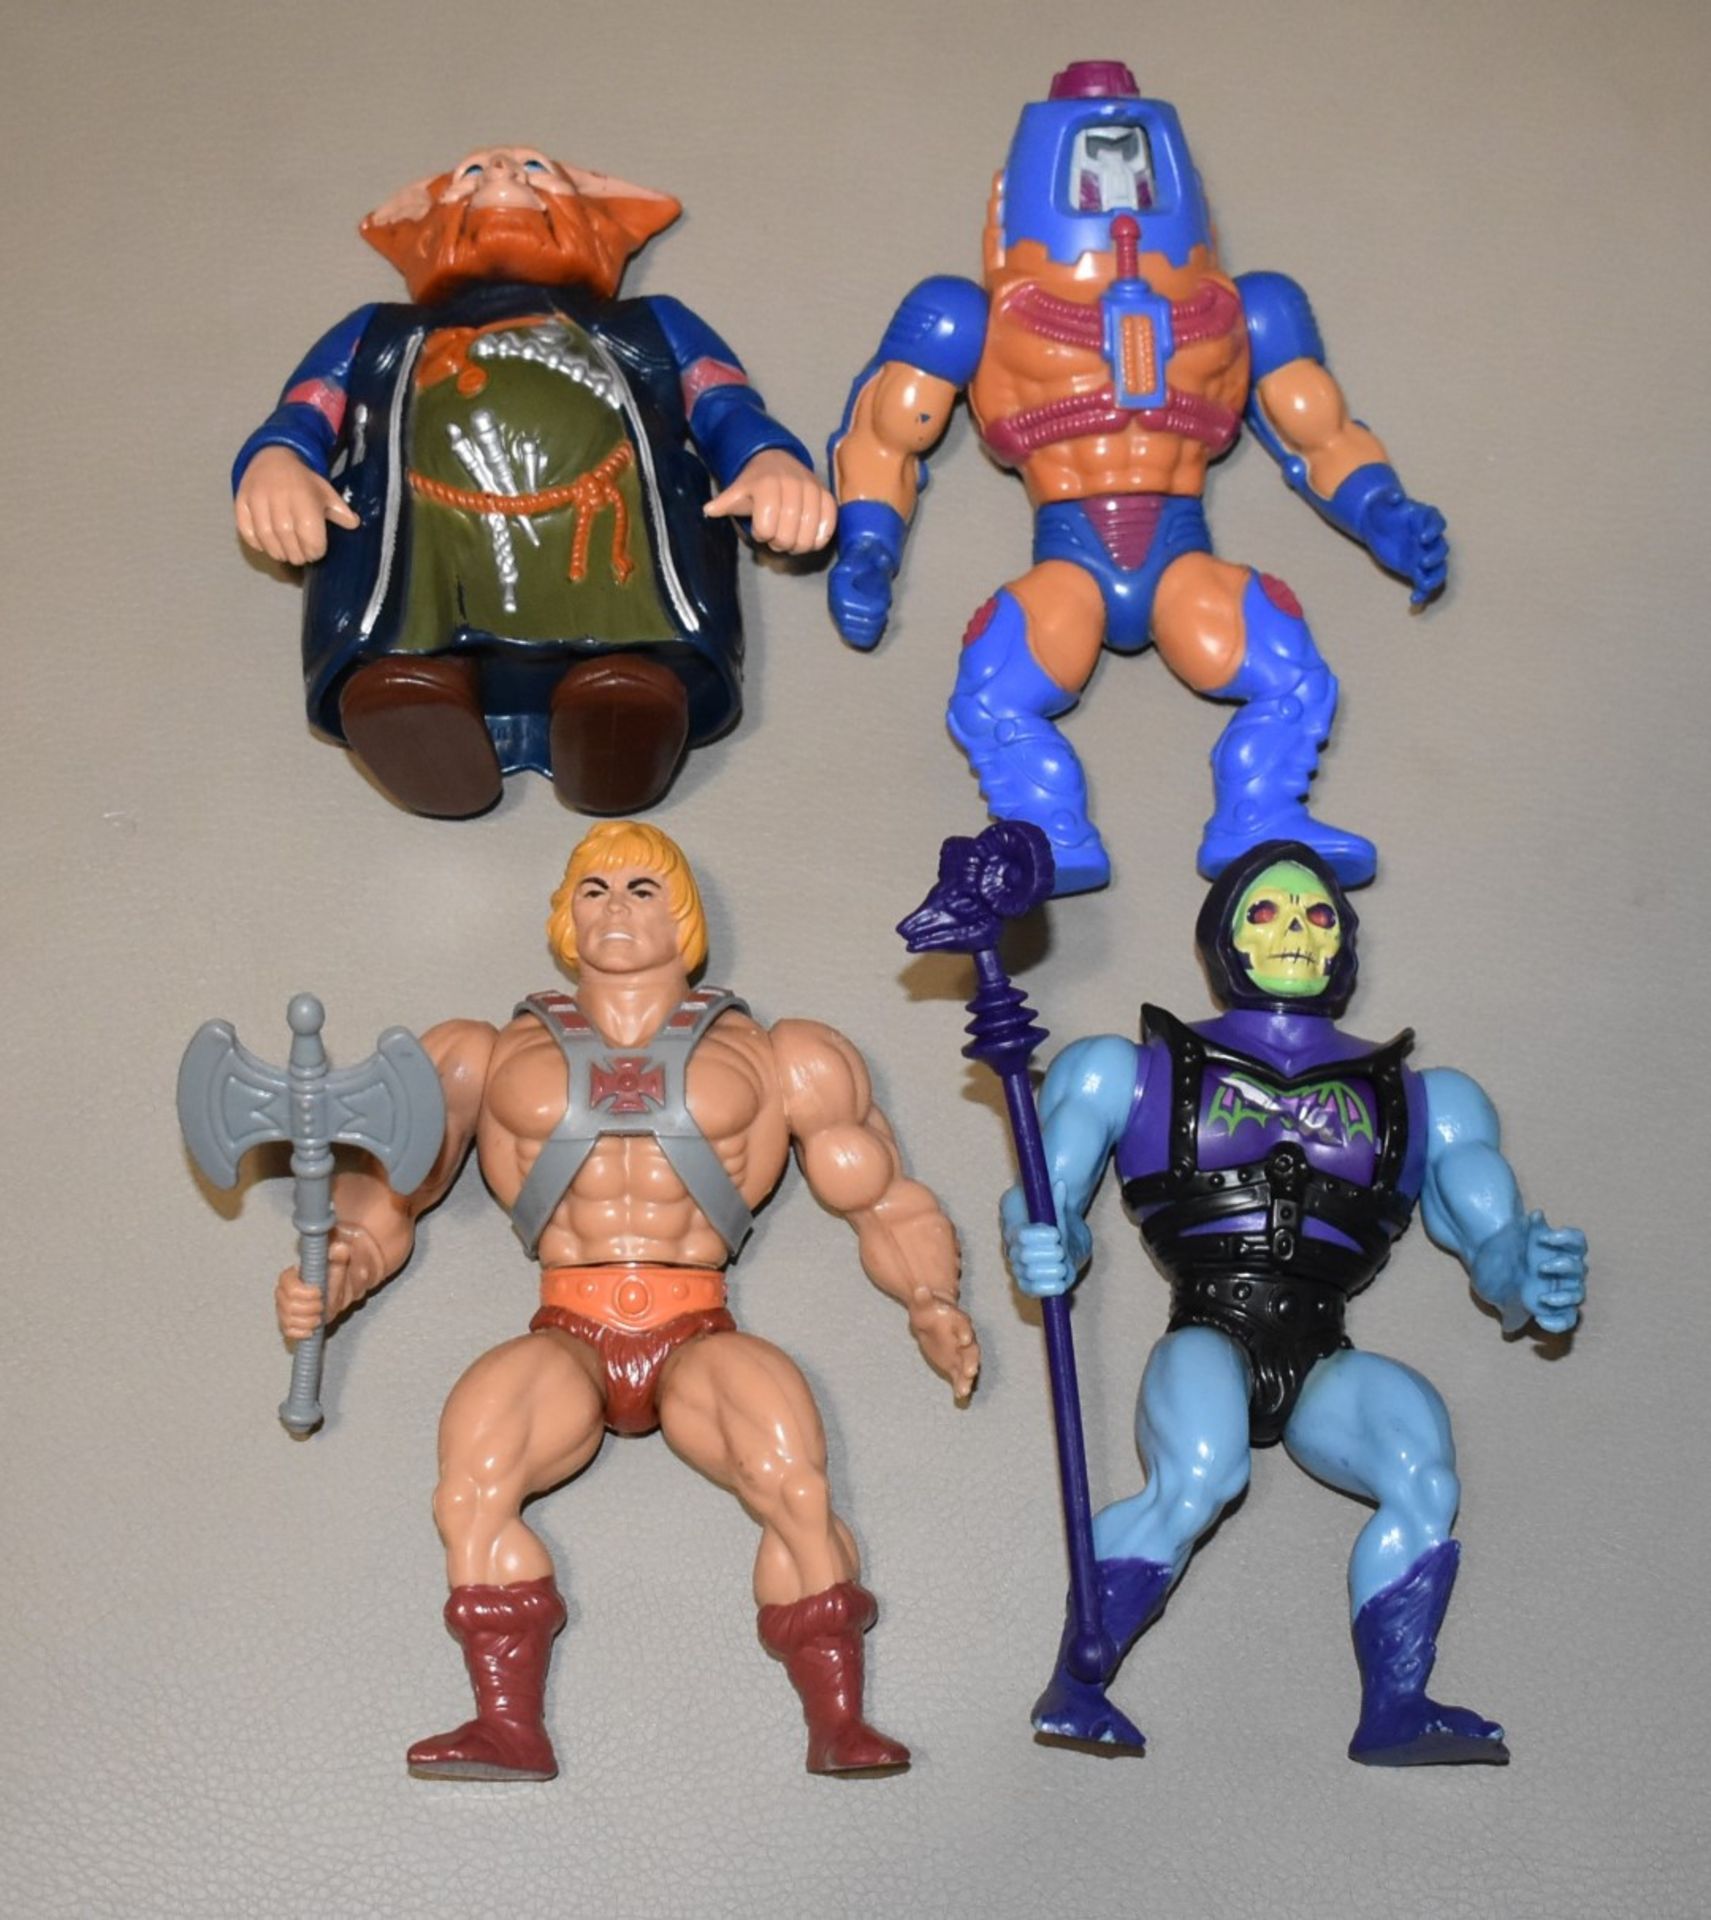 8 x Vintage He-Man Masters of the Universe Figures - Includes Some Original Accessories - Image 3 of 7